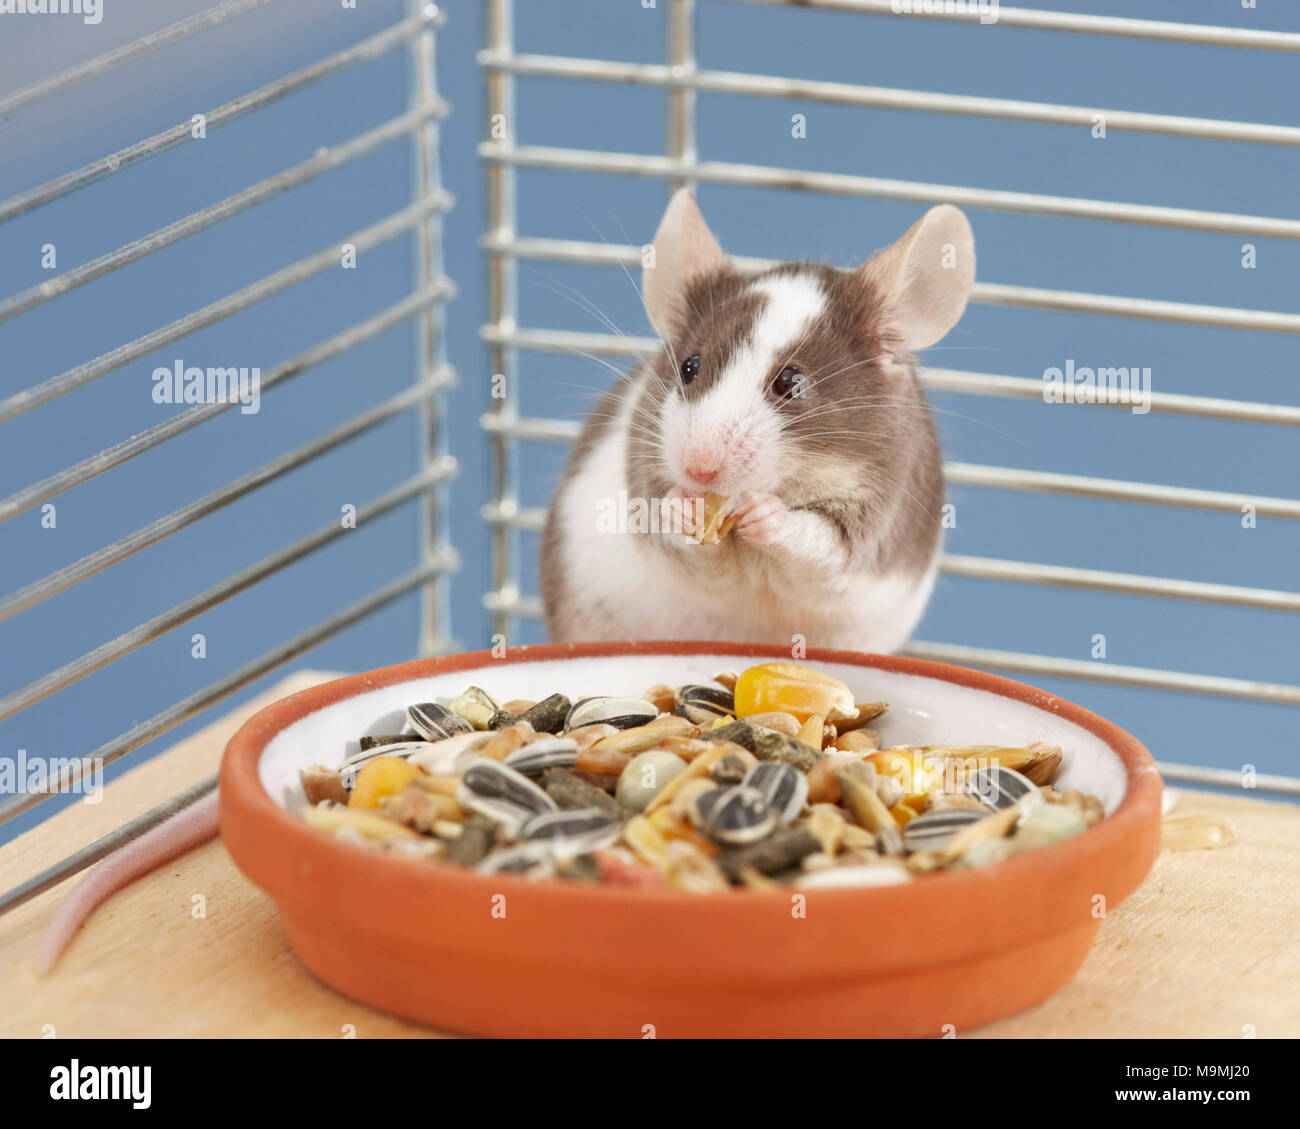 Fancy mouse. Male in a cage, eating from a feeding bowl. Germany Stock Photo